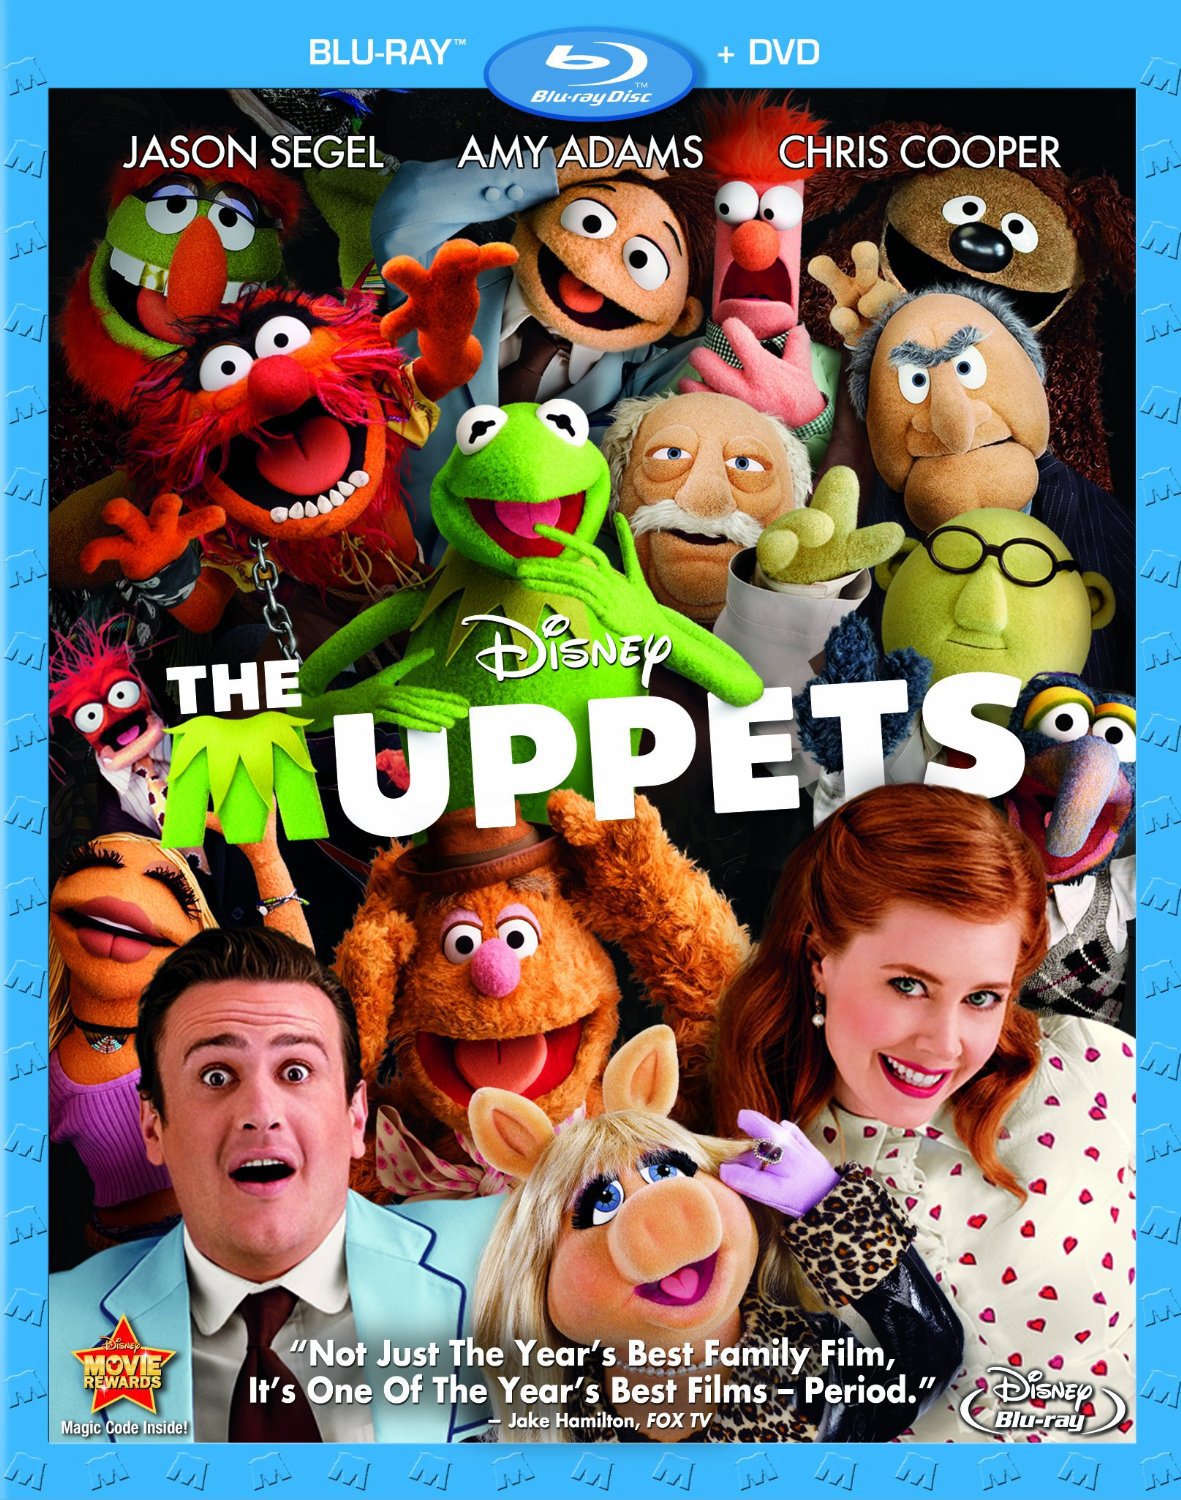 Muppets, The